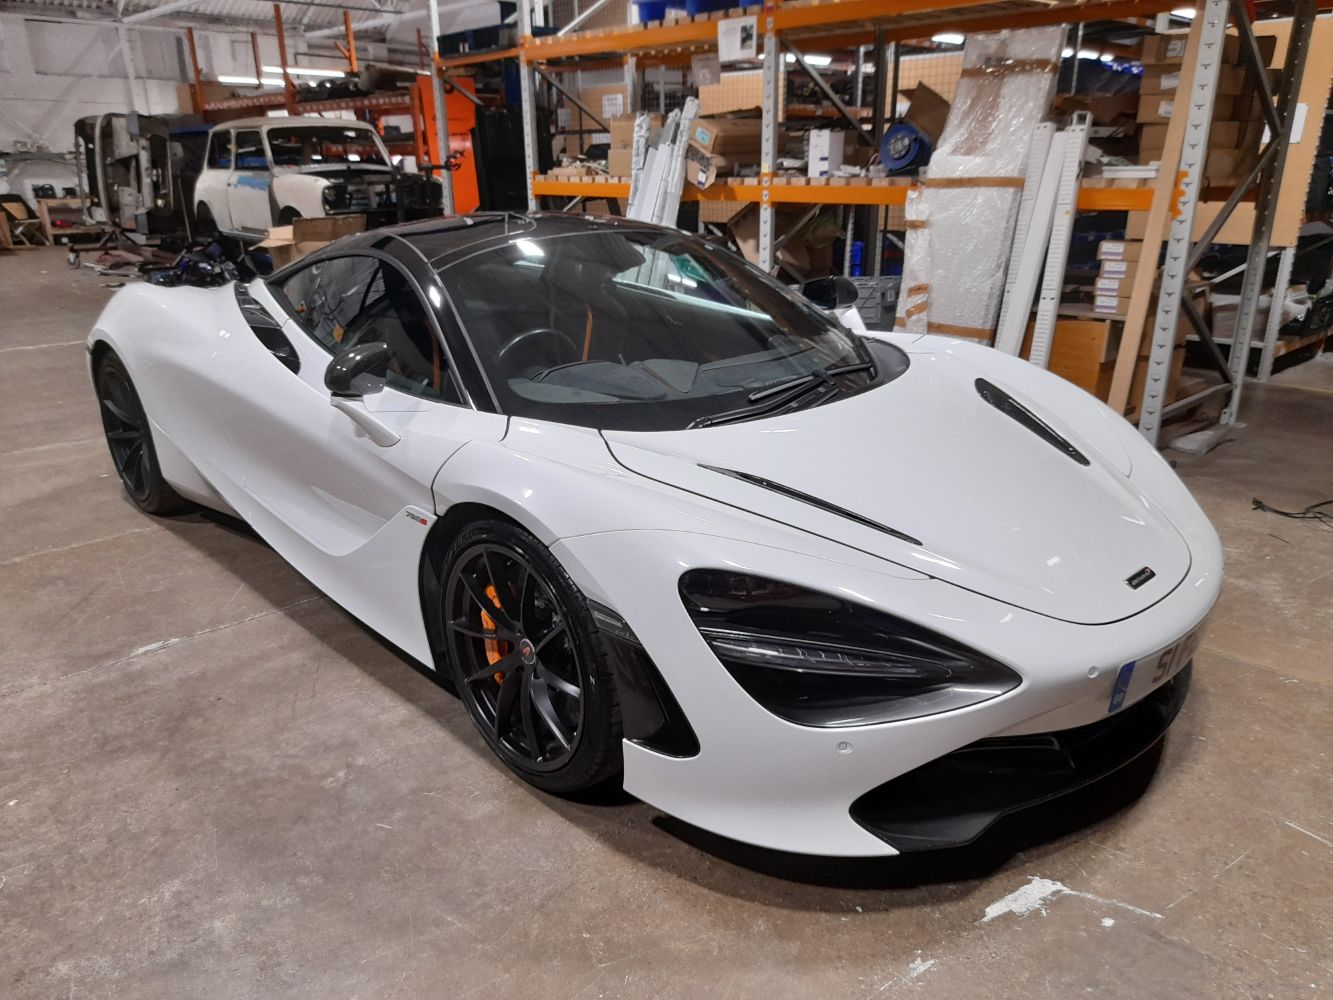 McLaren 20 Coupe 4.0 V8, Fleet of Vans, Cars and Contents of an Electrical Contractors